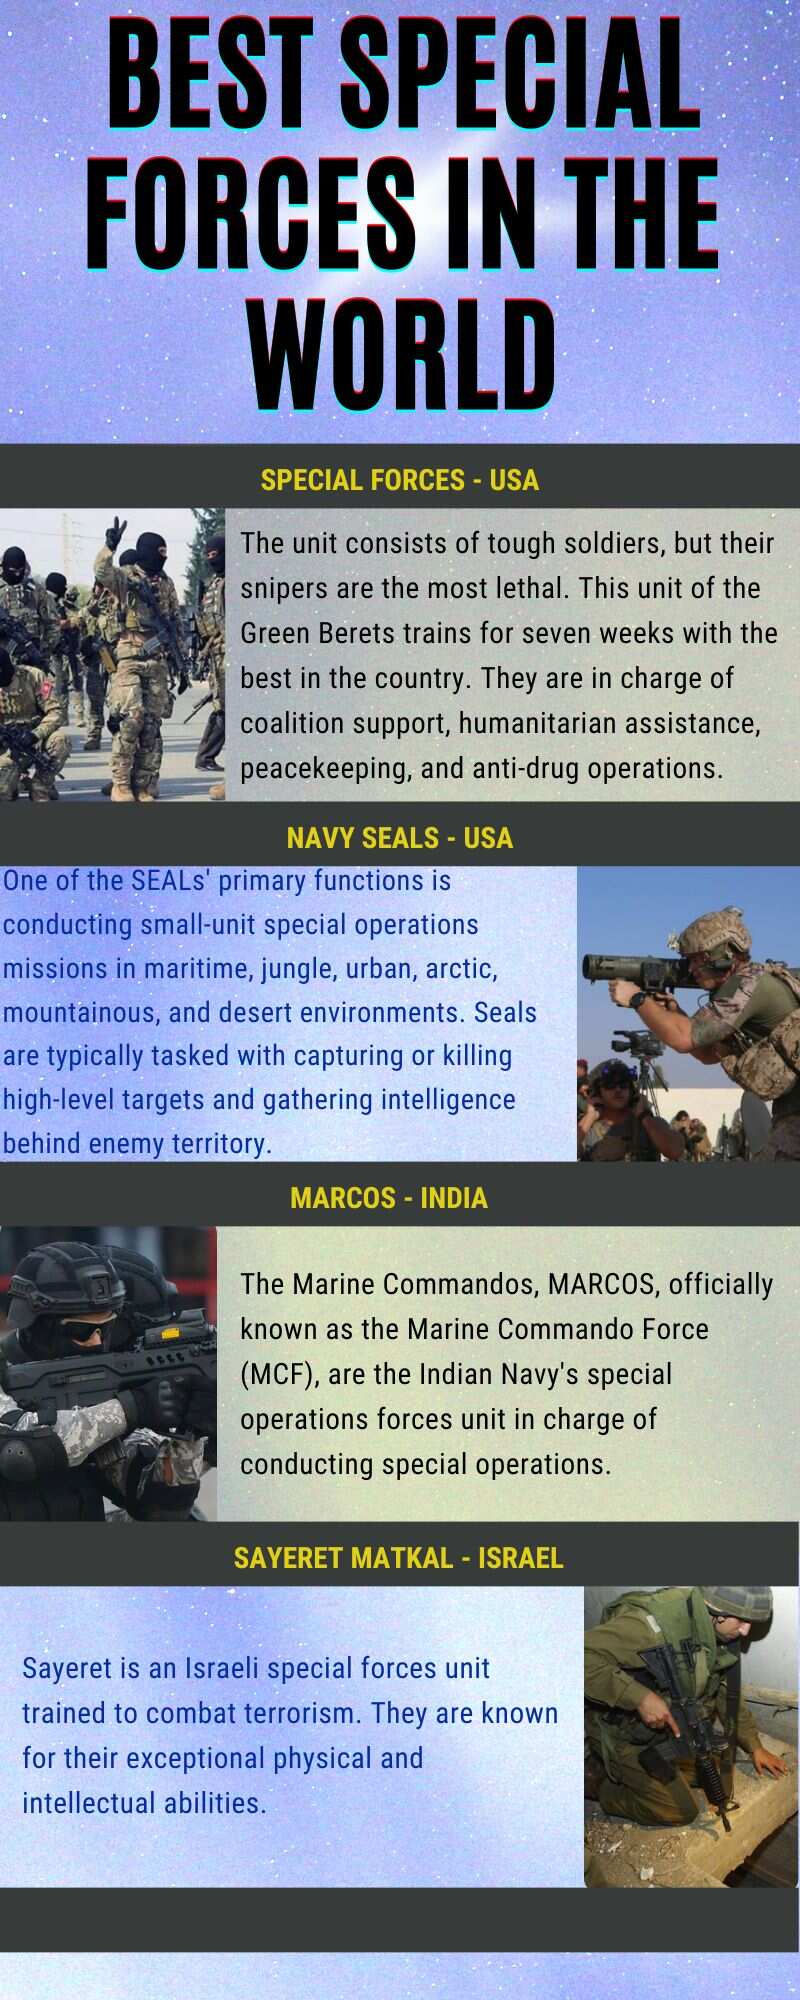 Best special forces in the world